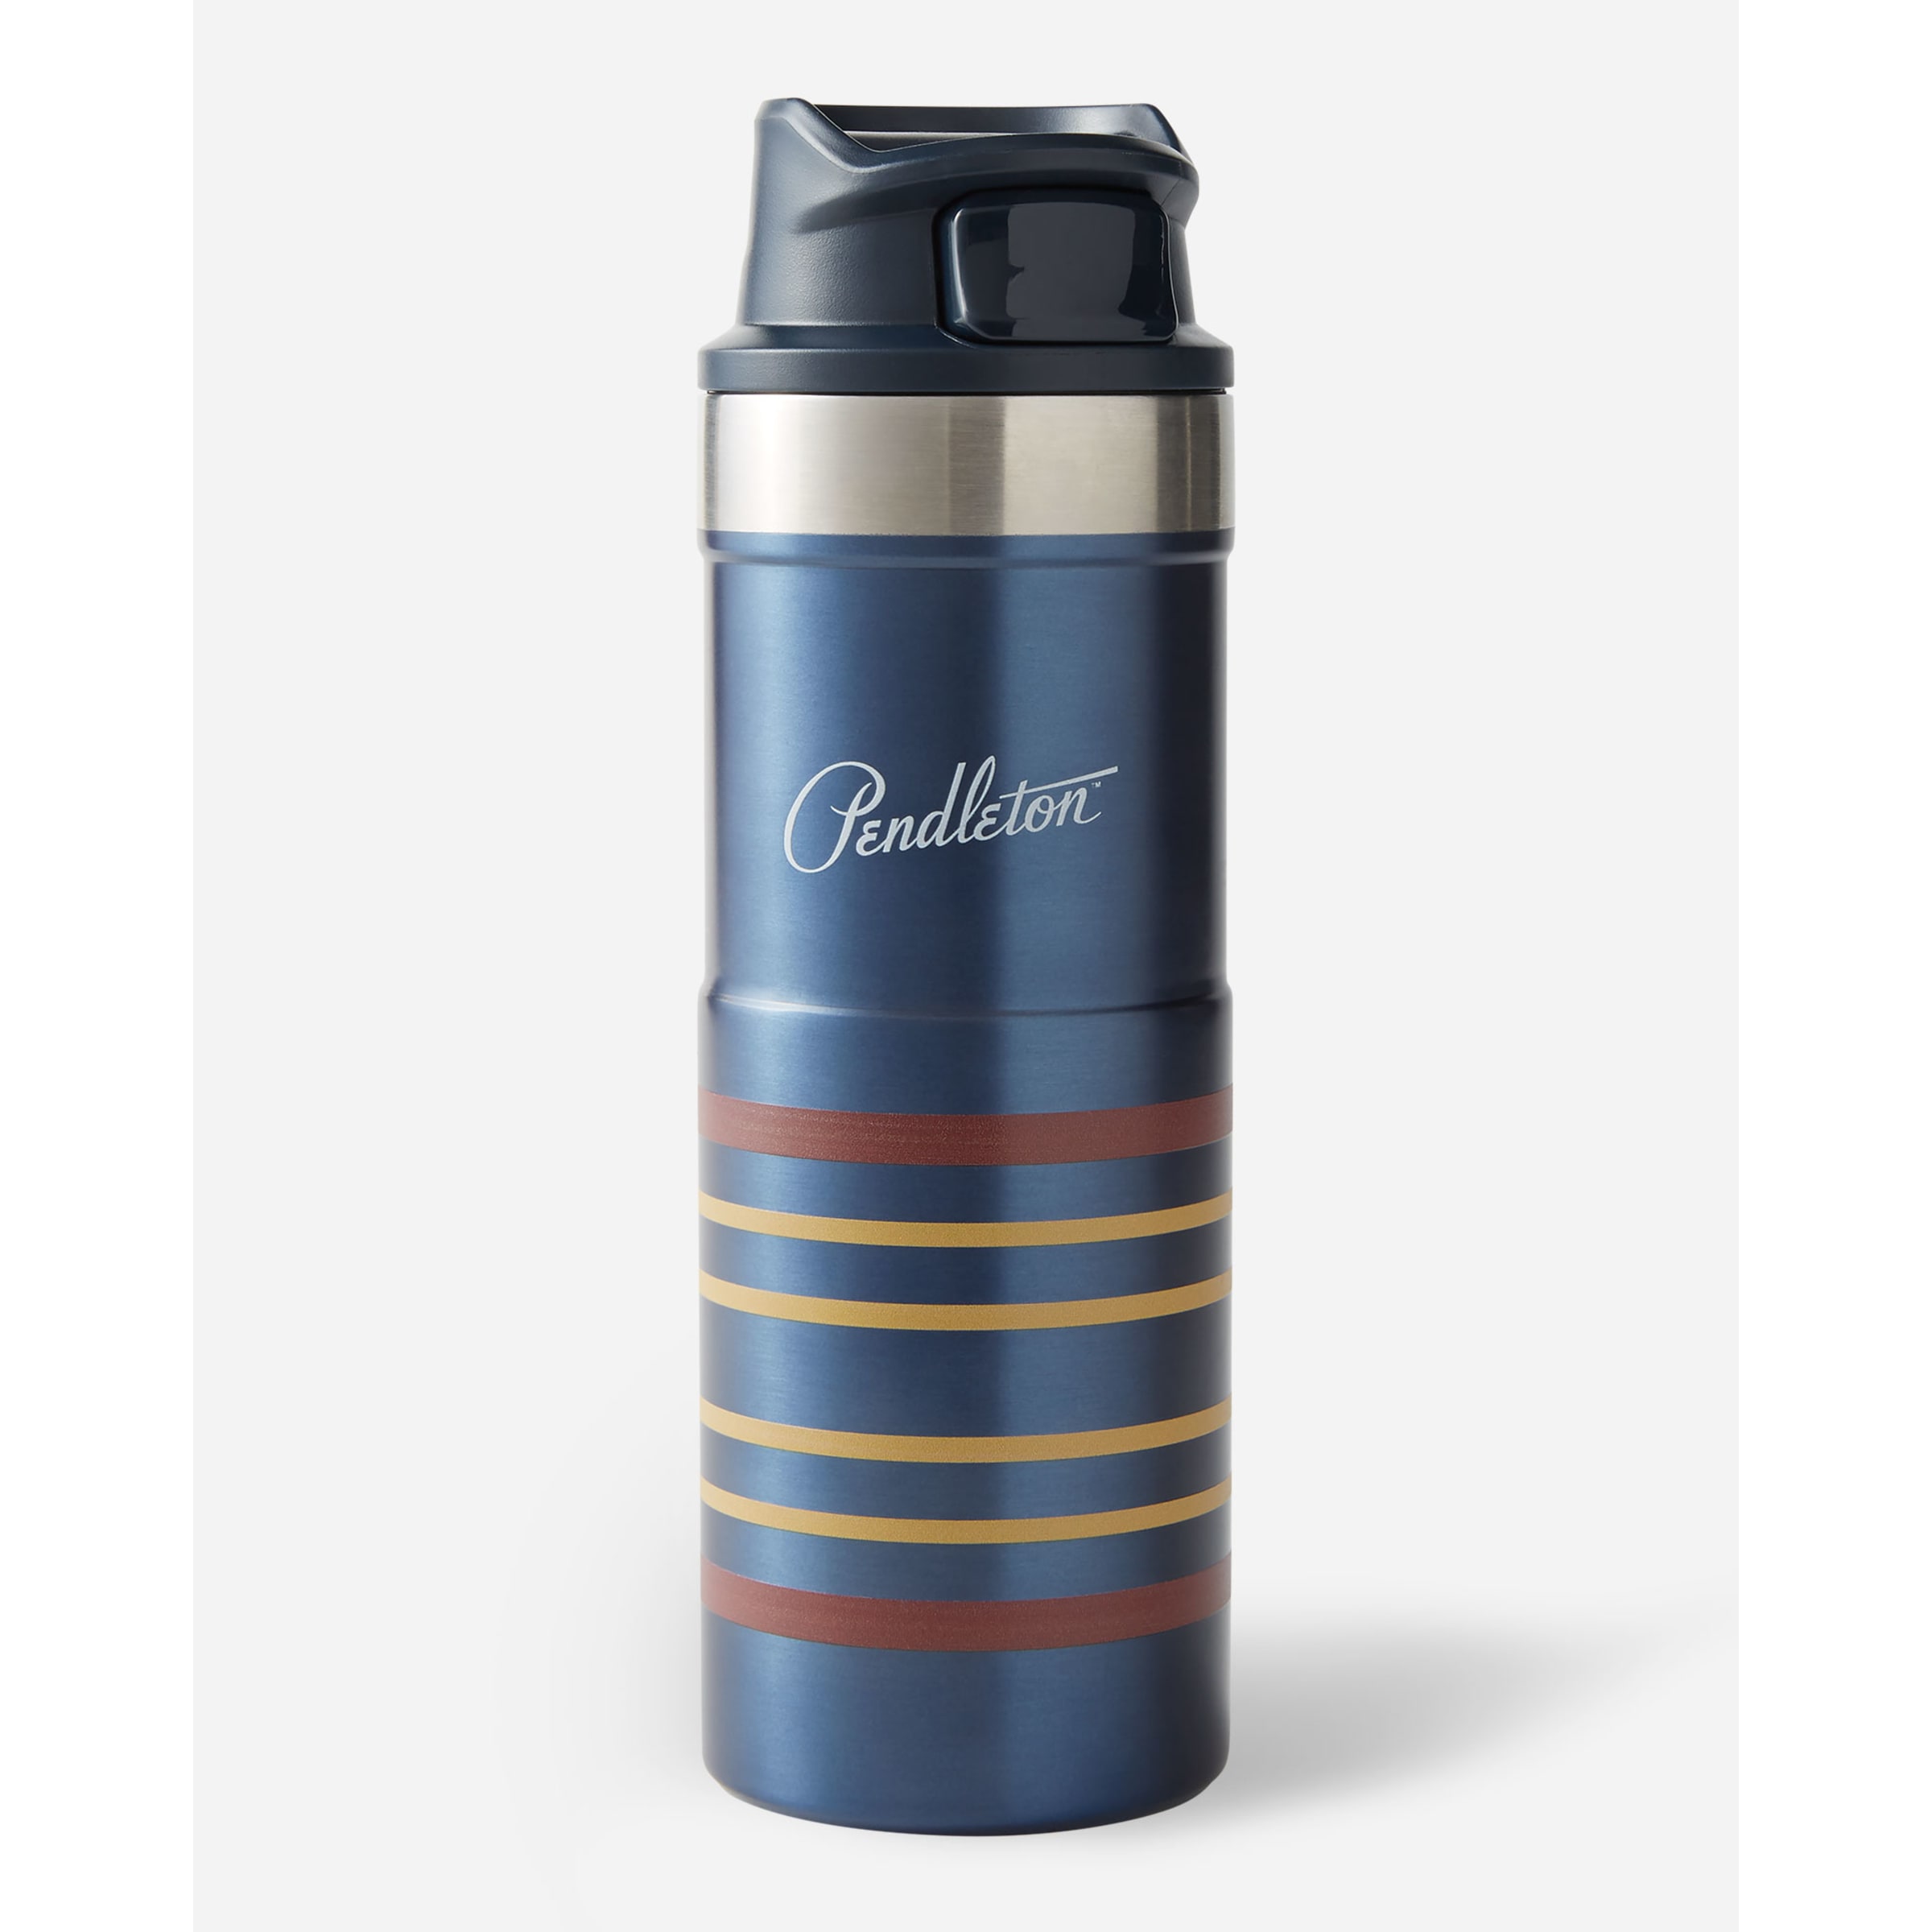 NEW Stanley Pendleton Thermos National Parks Edition Vacuum Bottle